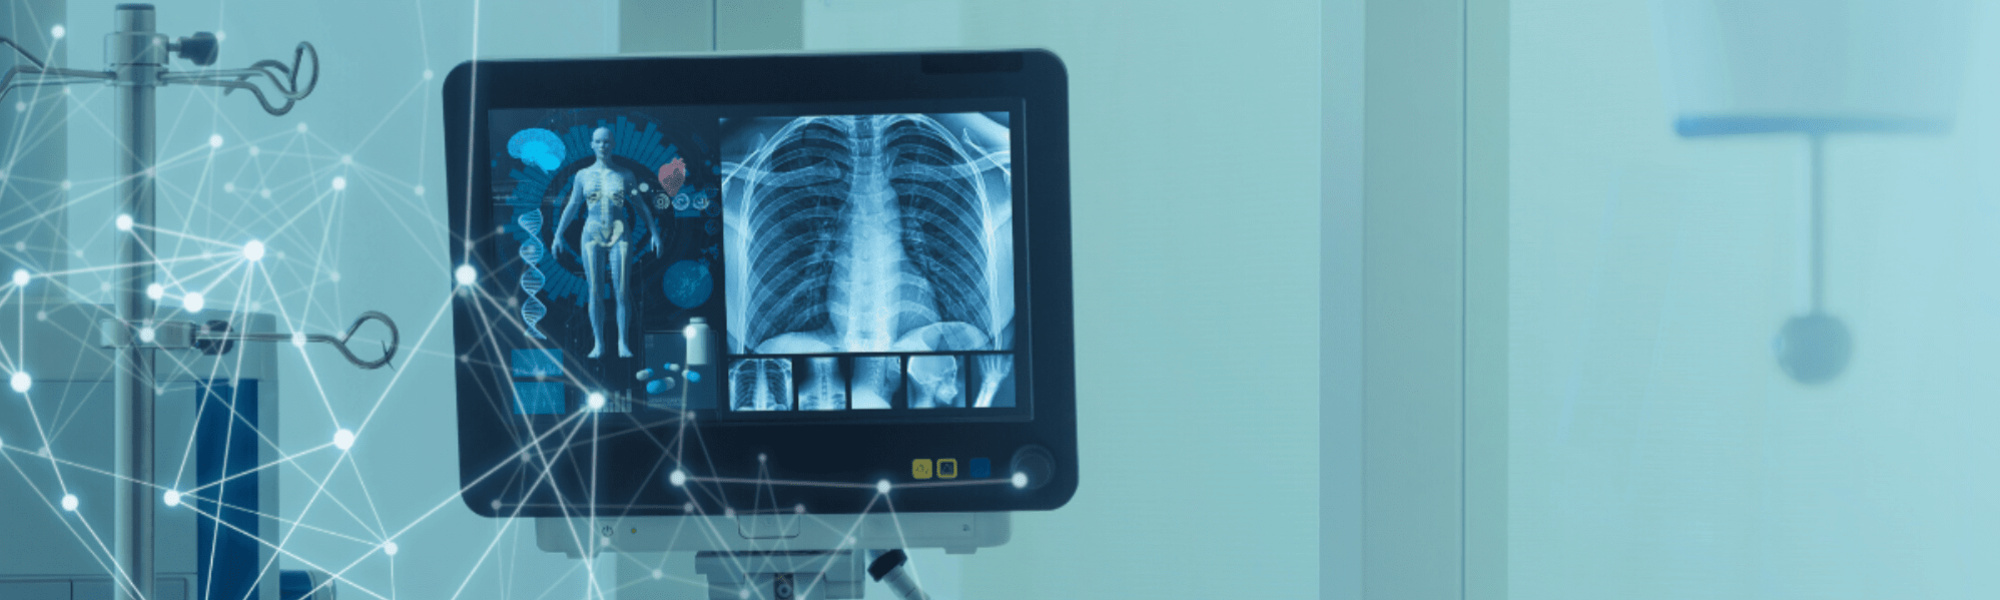 Image of x-ray equipment for life sciences promotion